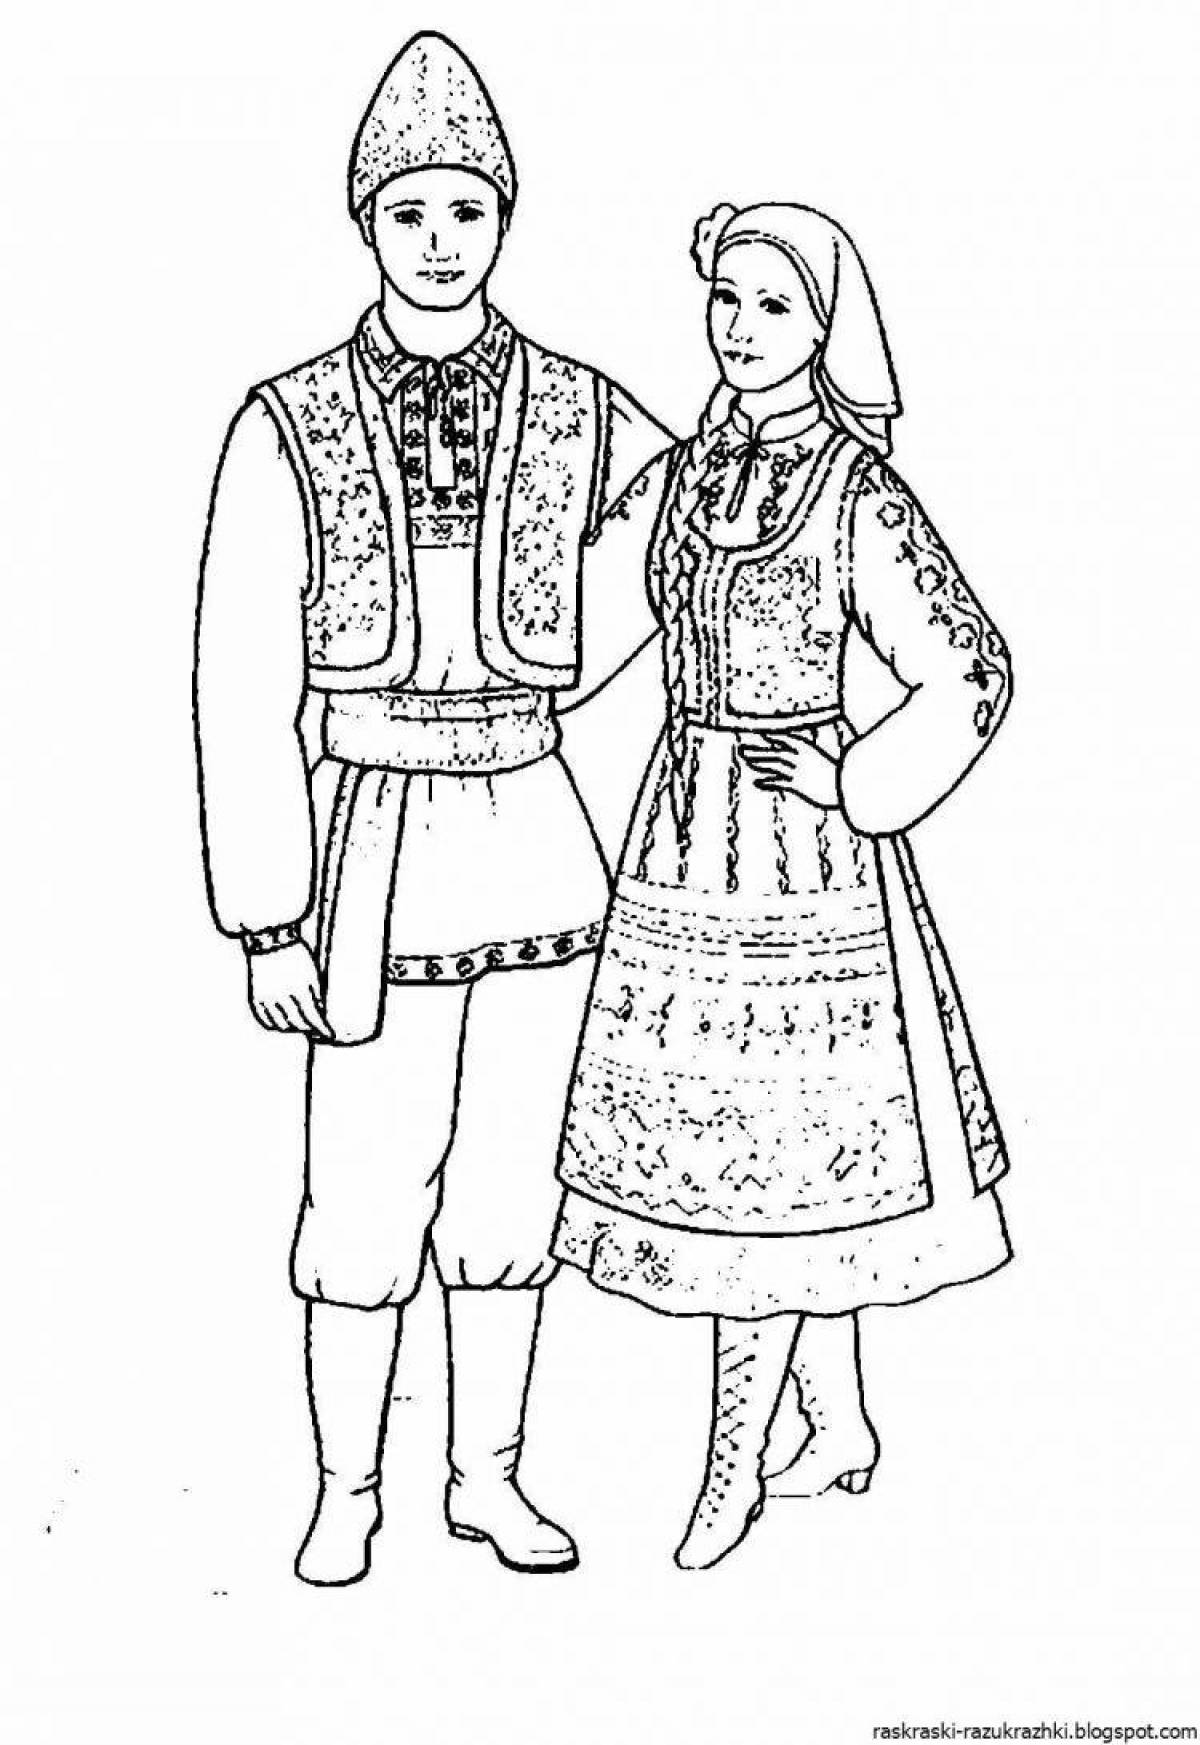 Coloring book of a cheerful Bashkir costume